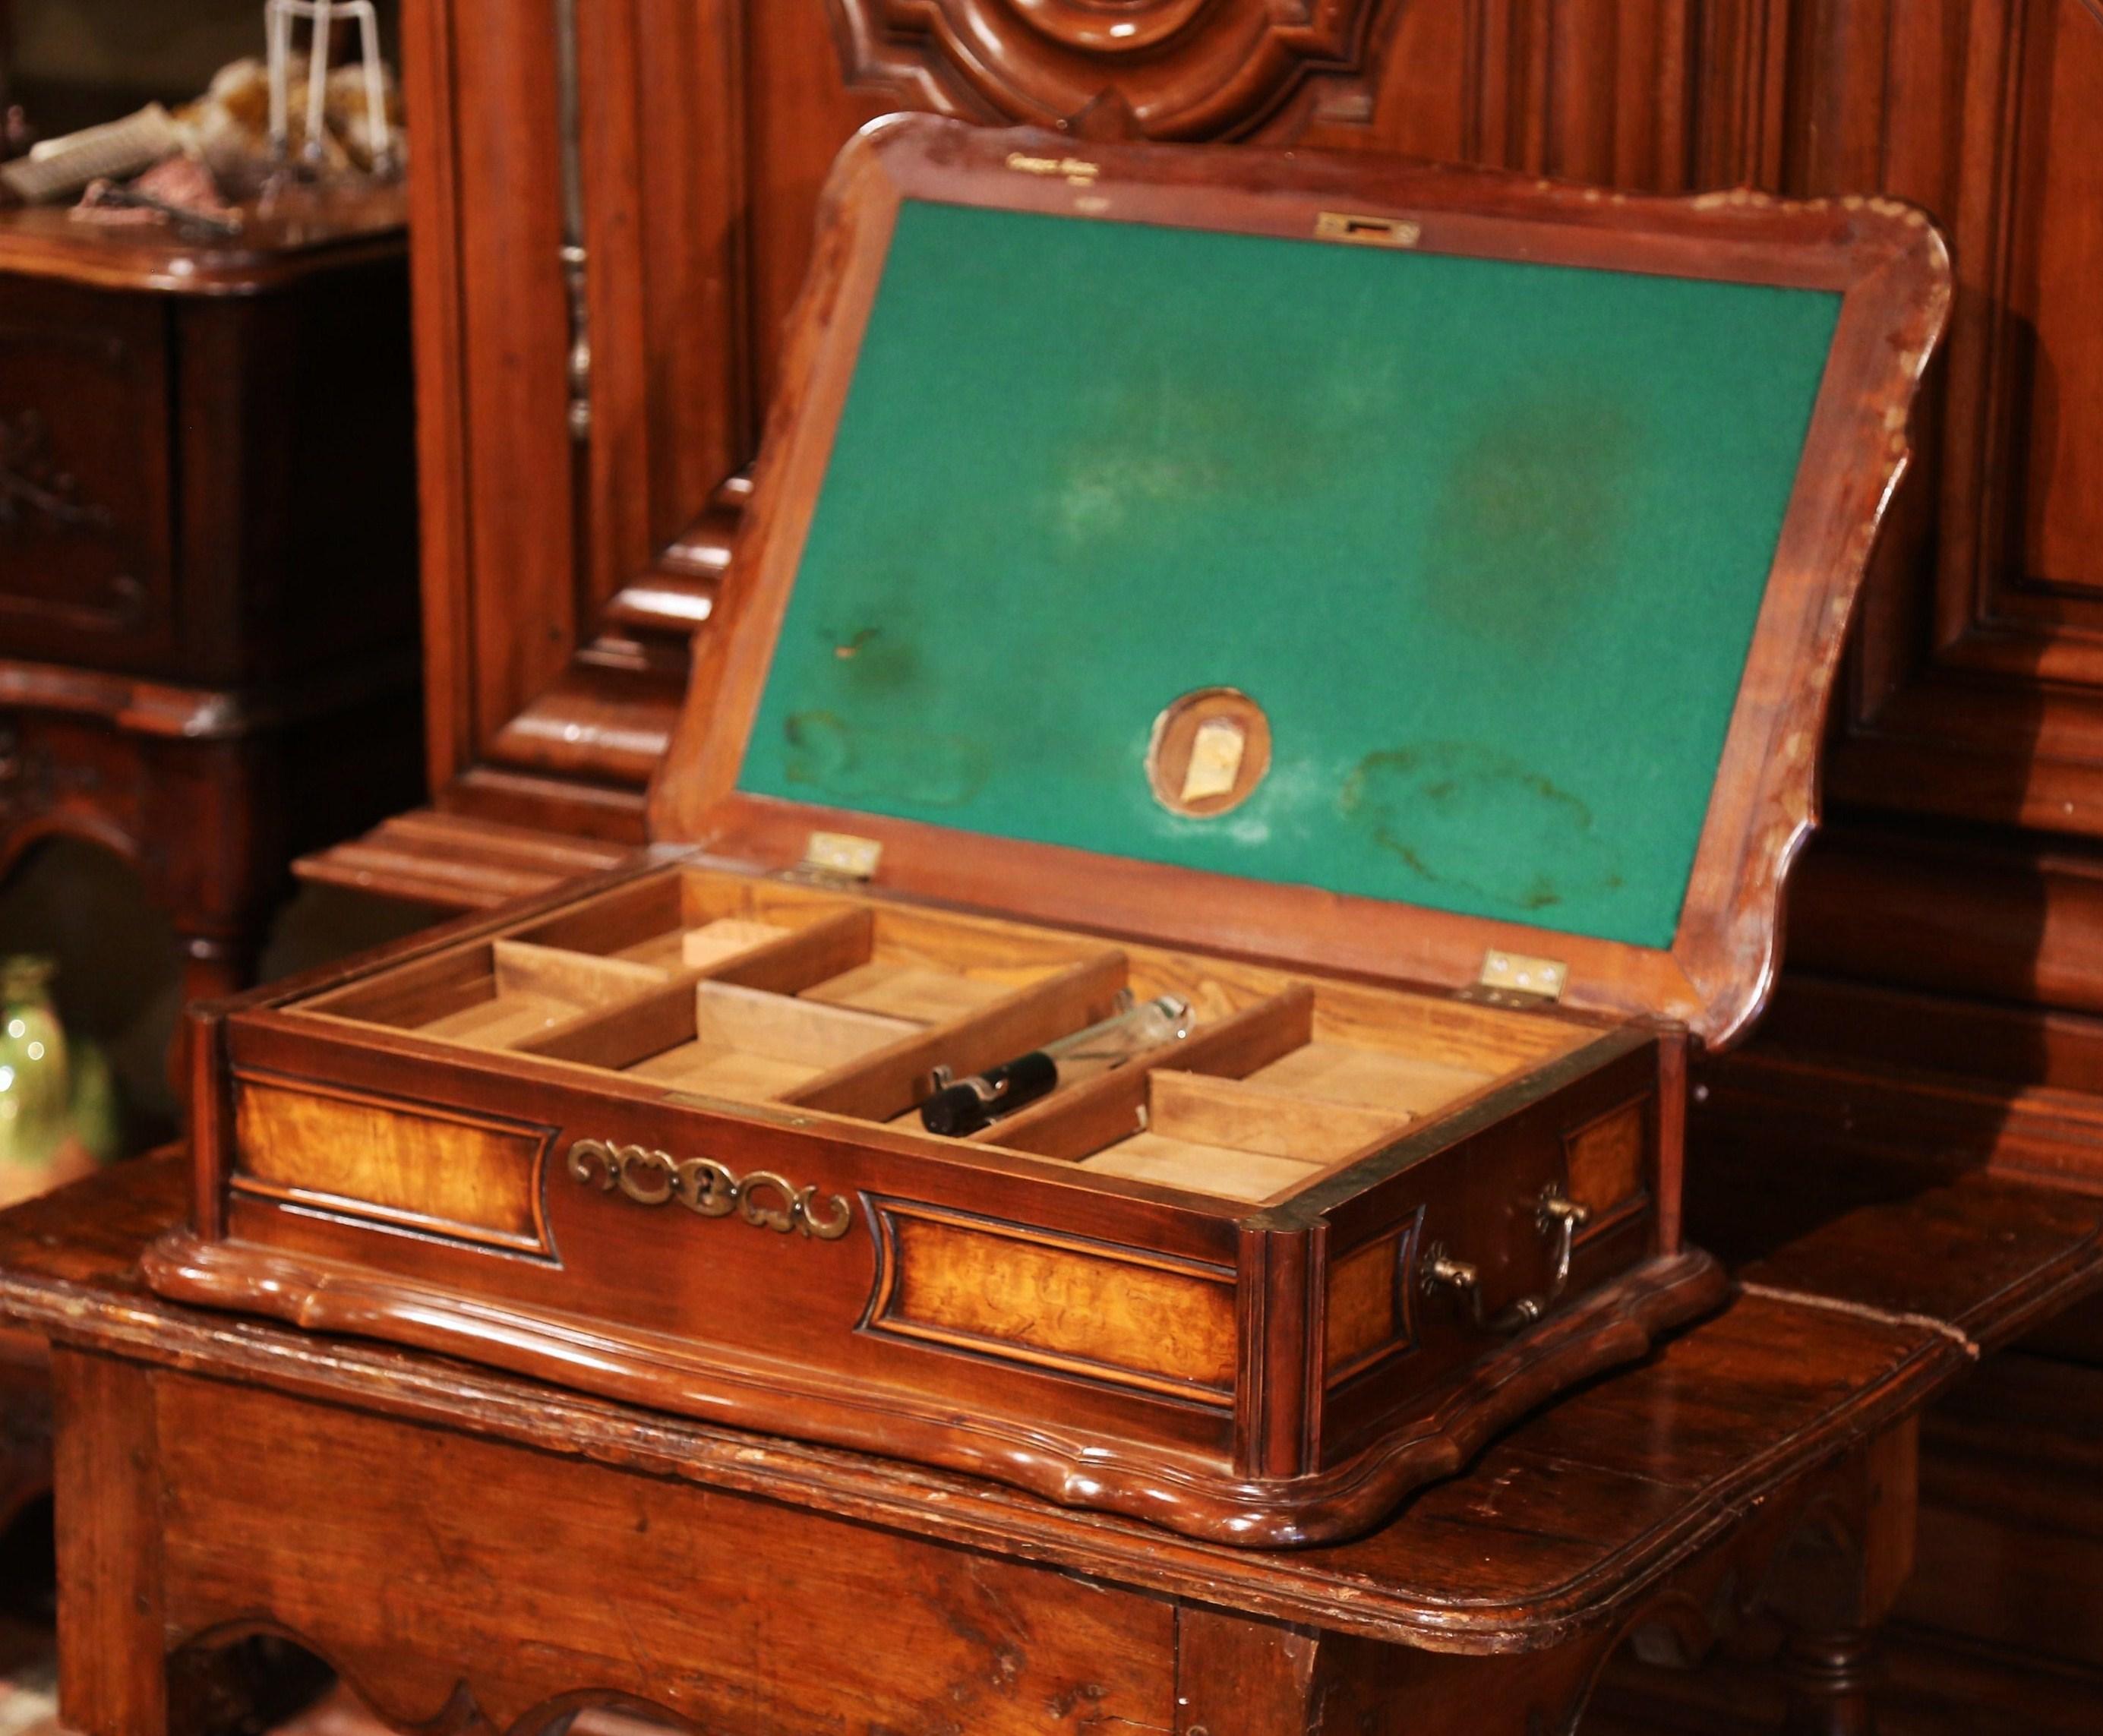 Offer your guests a cigar in style with this antique humidor! Crafted in France by Georges Blanc circa 1920, the two-tone fruitwood cigar box is made of walnut and burl and has sturdy iron handles. When you lift the top, the box reveals a green felt